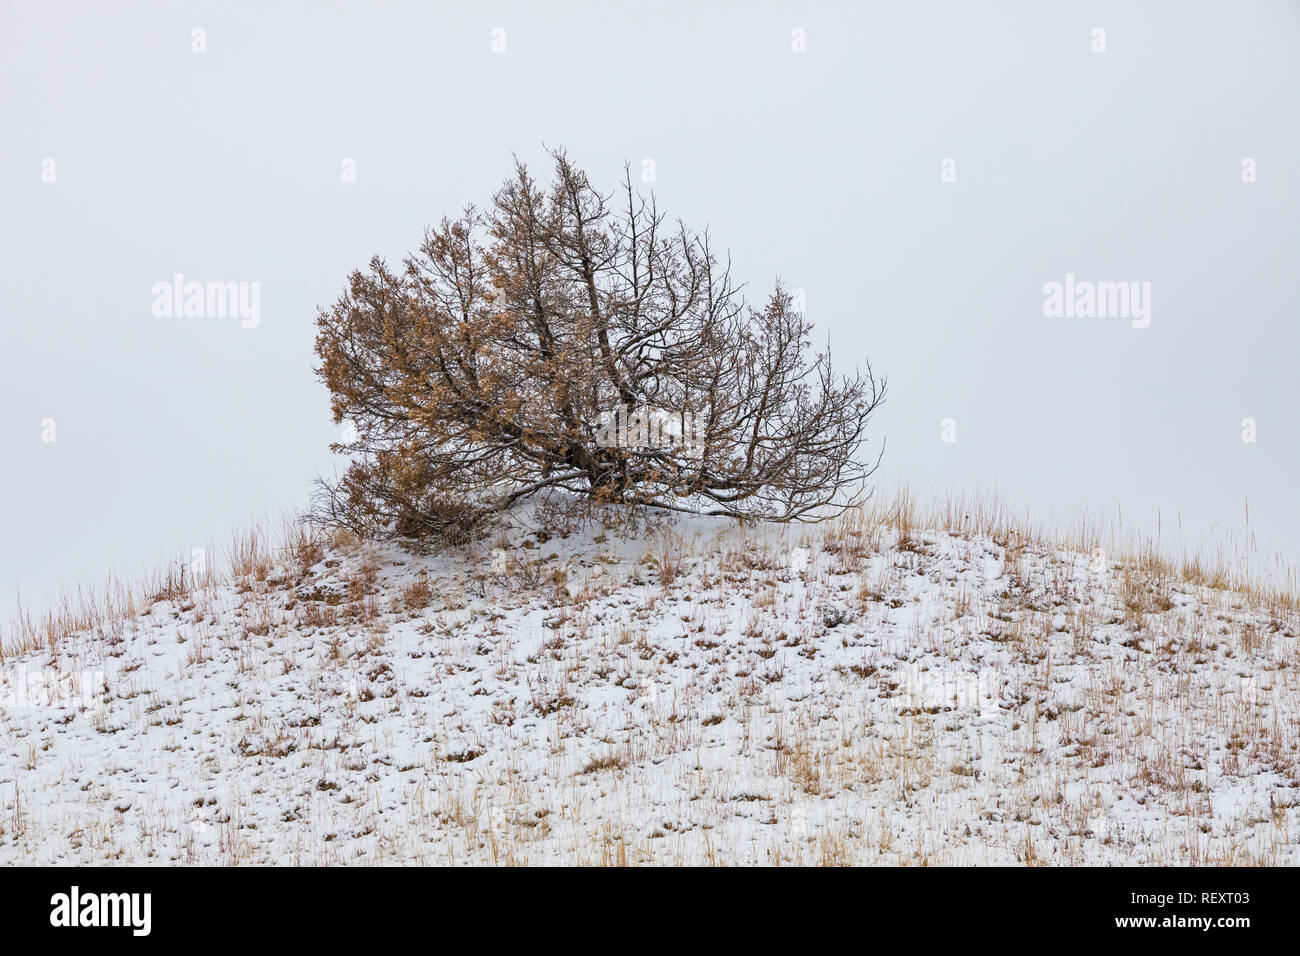 Rocky Mountain Juniper, Juniperus scopulorum, trees burned by wildfire, on a snowy November day in the South Unit of Theodore Roosevelt National Park, Stock Photo